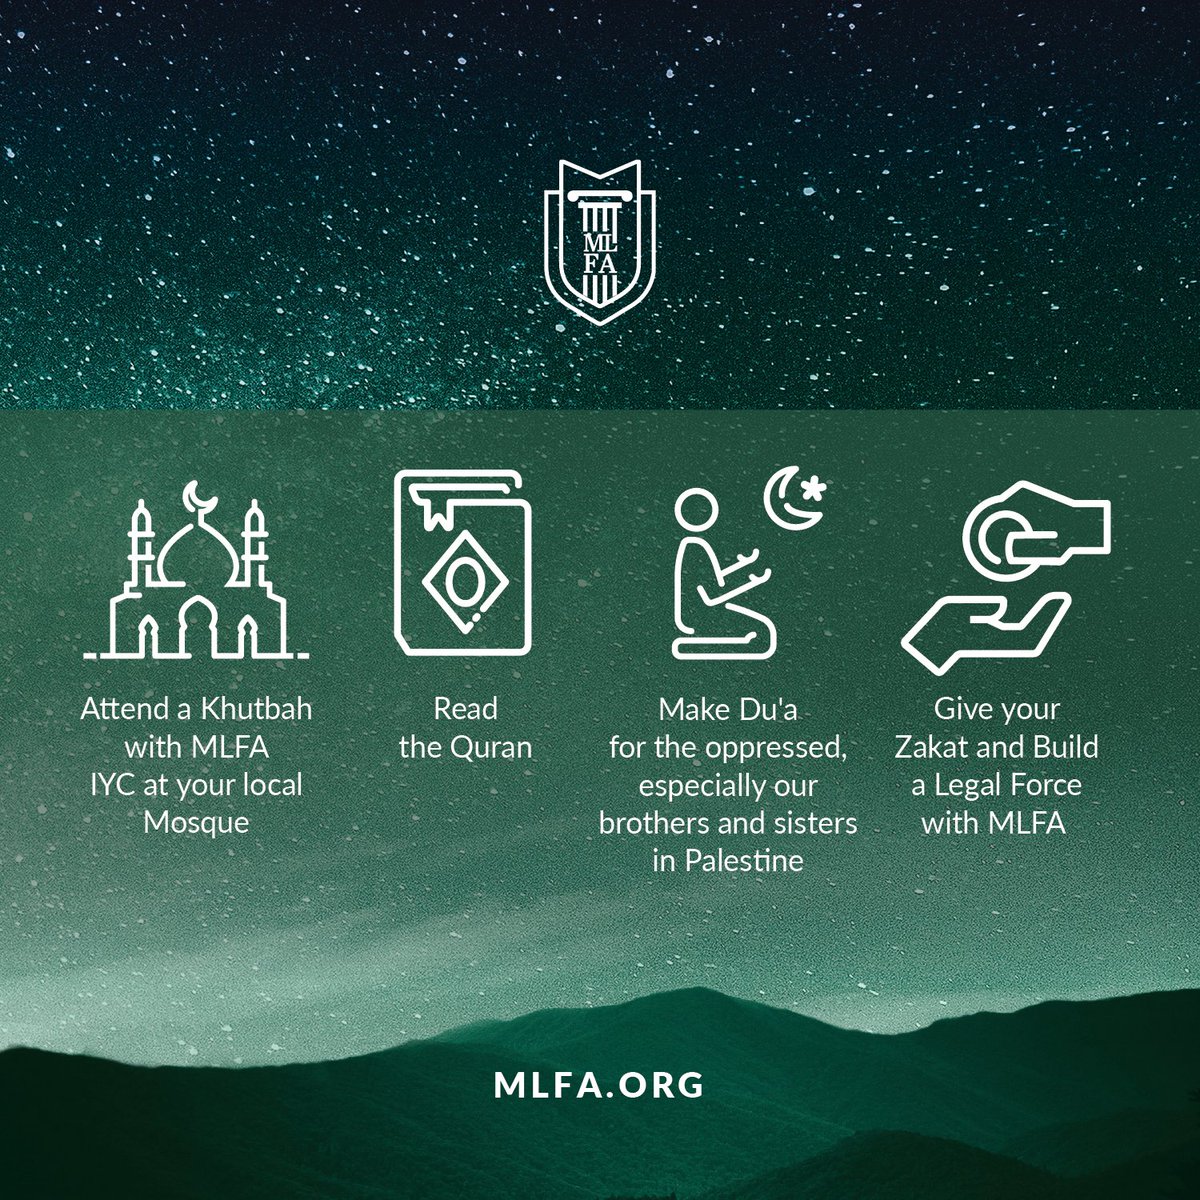 Experience the power of Laylat al-Qadr—the most powerful night of Ramadan. As we defend the rights of Muslim Americans, let's reflect on unity, justice, and compassion.  #Ramadan #LastTenNights #Prayer #Compassion #Justice #MLFA #MuslimLegal